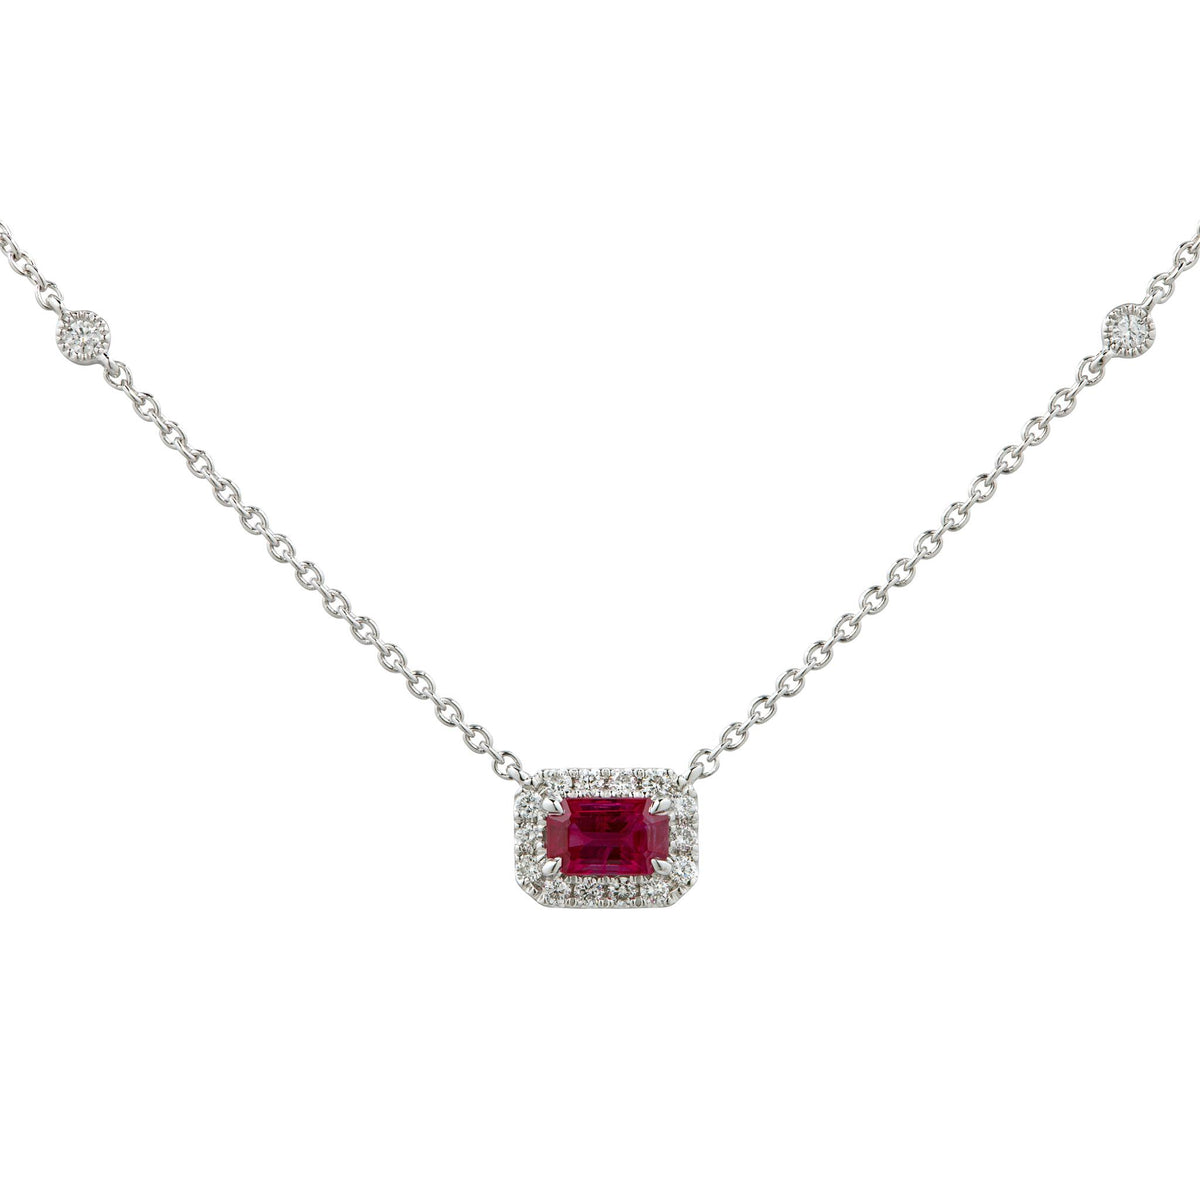 18Kt White Gold Halo Gemstone Pendant With 0.36ct Ruby